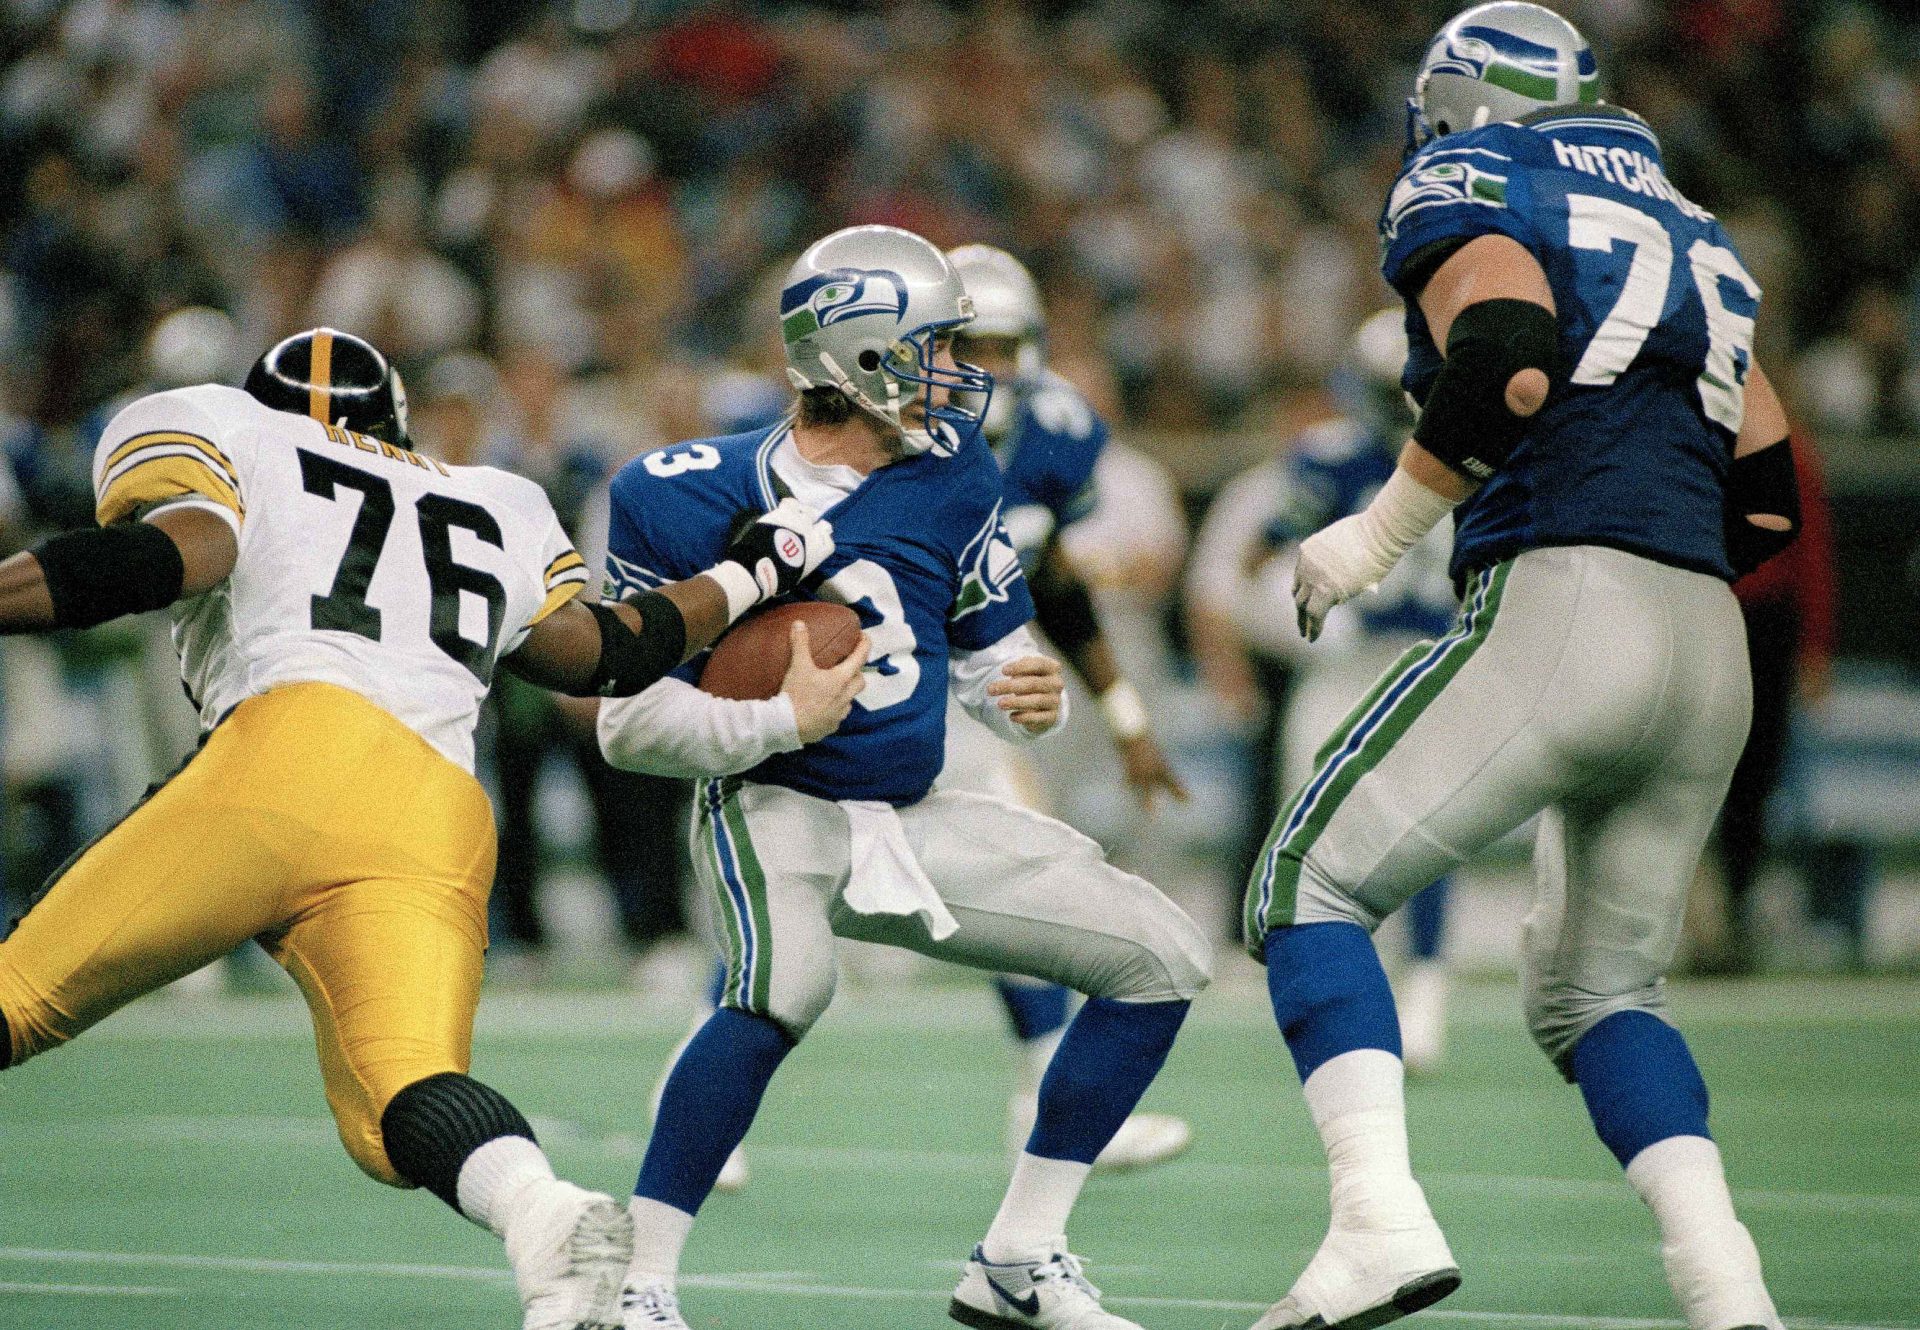 Seattle Seahawks quarterback, Rick Mirer (3) is sacked for a seven-yard-loss by Kevin Henry (76) of the Pittsburgh Steelers during the second quarter of their NFL game in Seattle, Wash., Sunday, Dec. 26, 1993. Dementia tests in the NFL concussion litigation allow doctors to use different baseline standards for Black and white retired players, making it more difficult for Blacks to show injury and qualify for awards, lawyers for two ex-players argued in court filings Tuesday, Aug. 25, 2020.